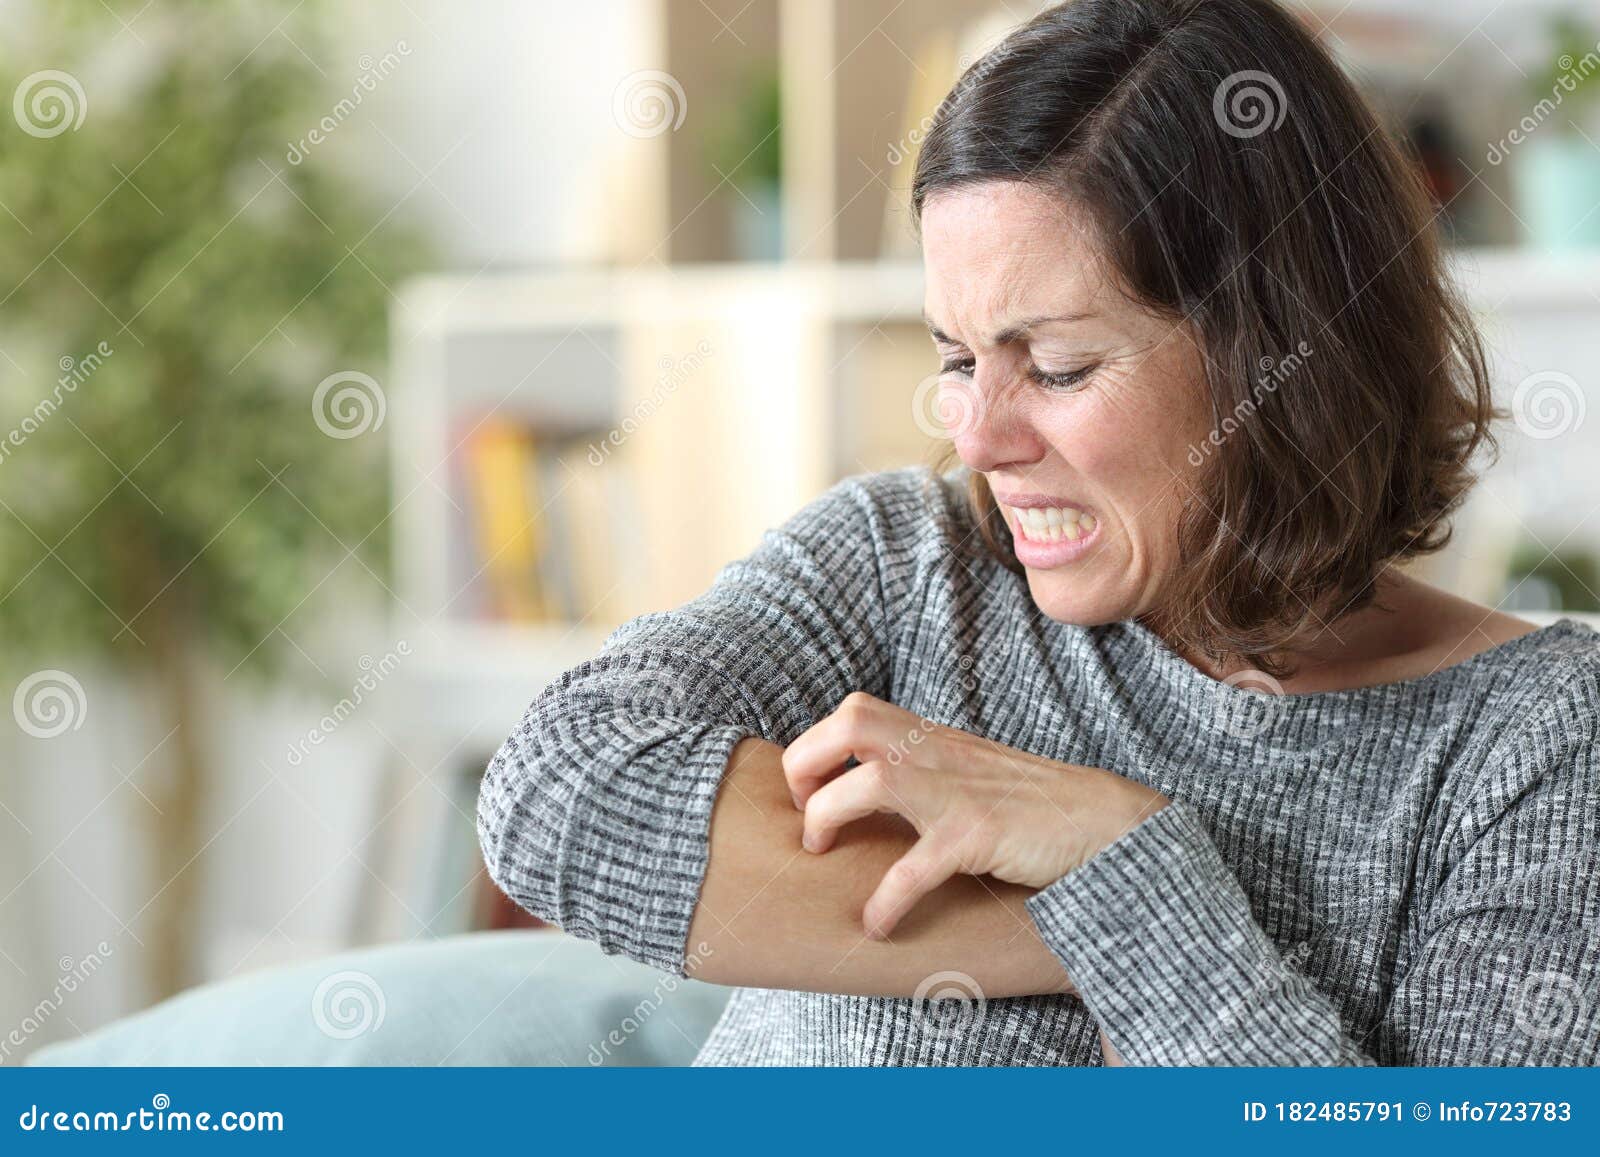 middle age woman scratching itchy skin at home